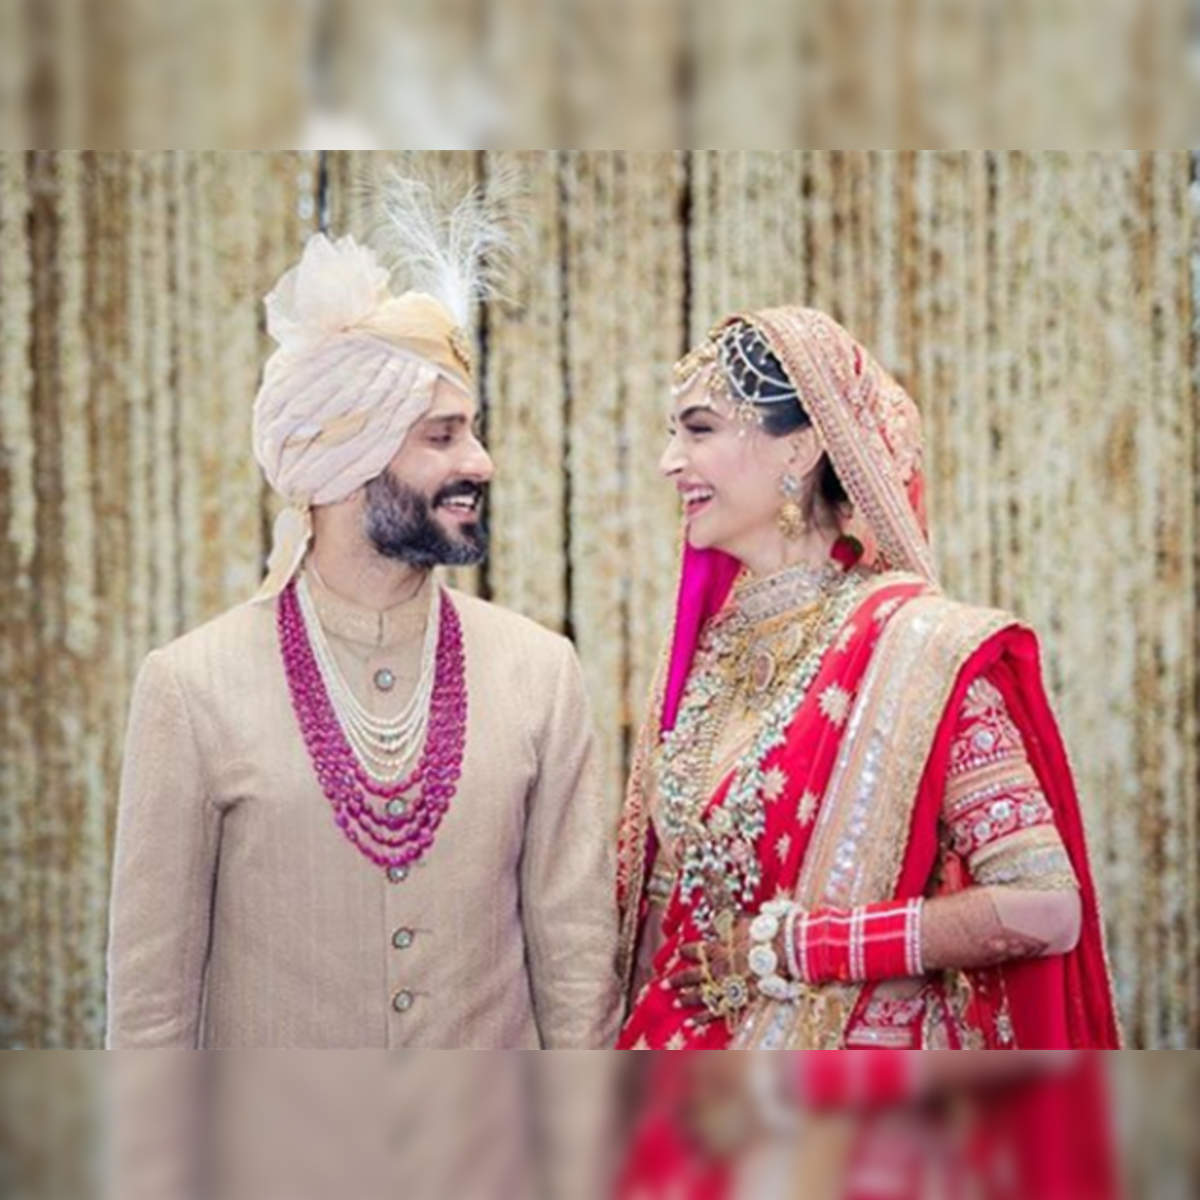 The Complete Wedding Album Of Sonam Kapoor And Anand Ahuja